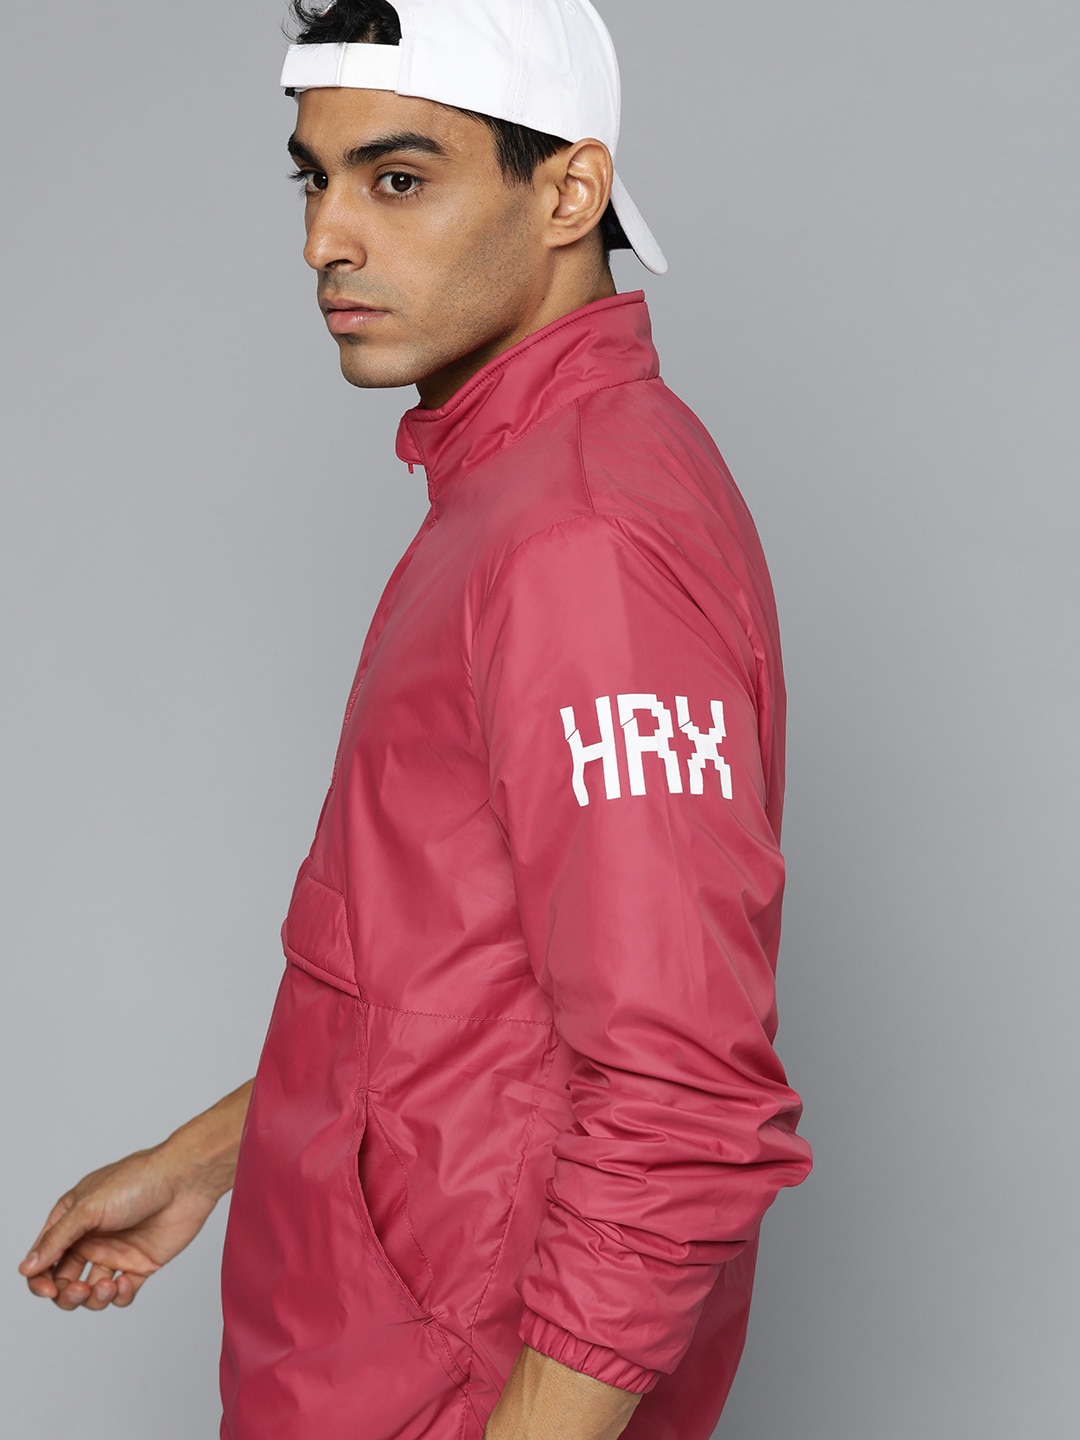 Buy hrx by hrithik roshan jackets men in India @ Limeroad-calidas.vn